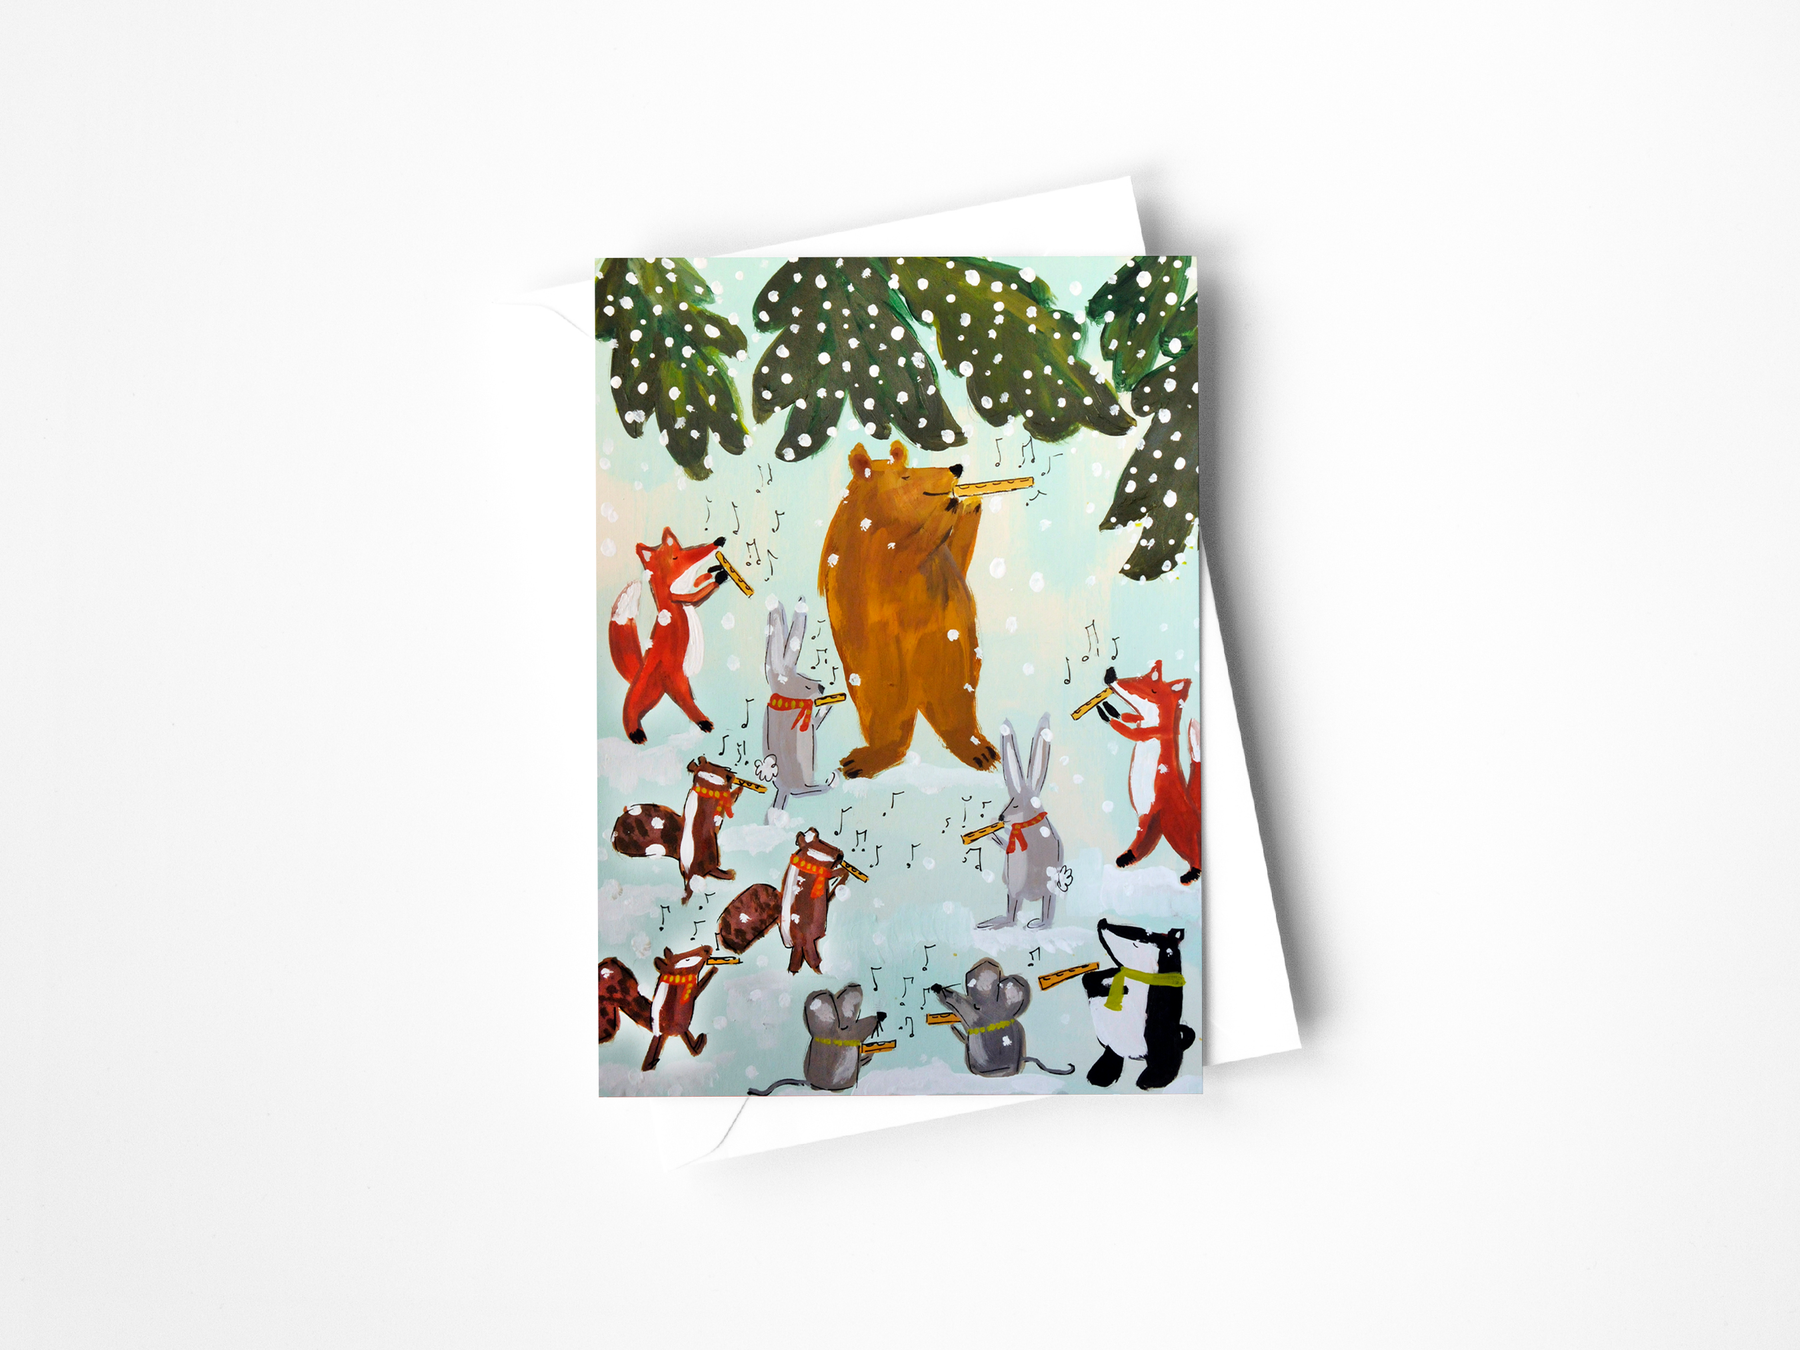 11 Pipers Piping Greeting Card